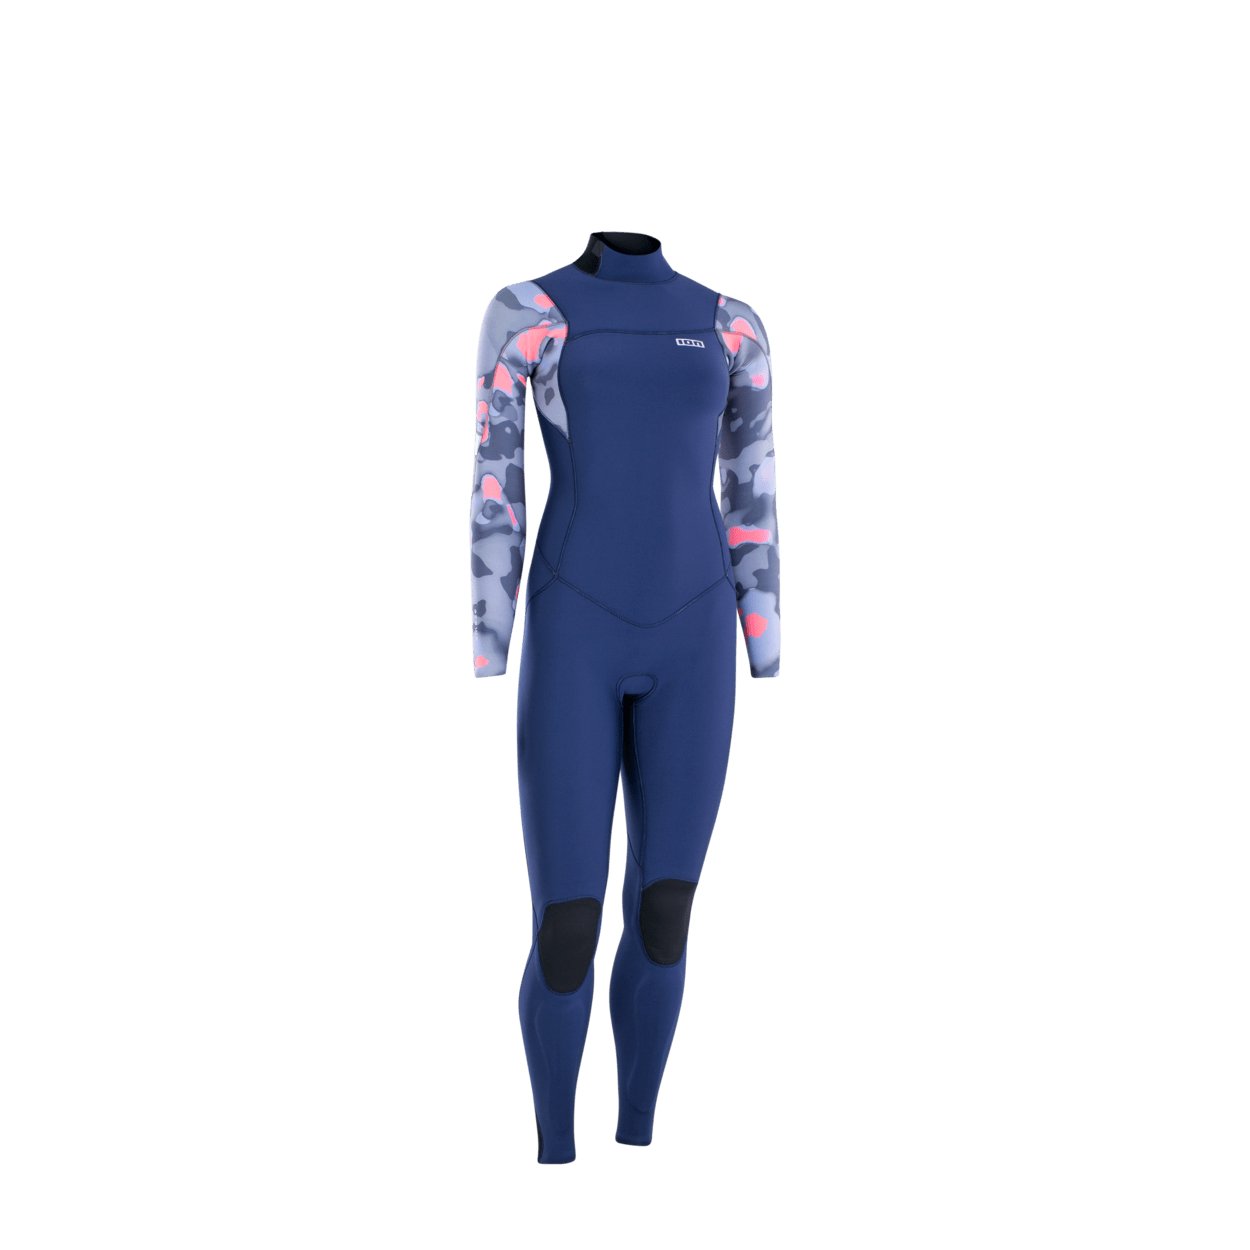 ION Amaze Amp 6/5 Back Zip 2022 - Worthing Watersports - 9010583057415 - Wetsuits - ION Water